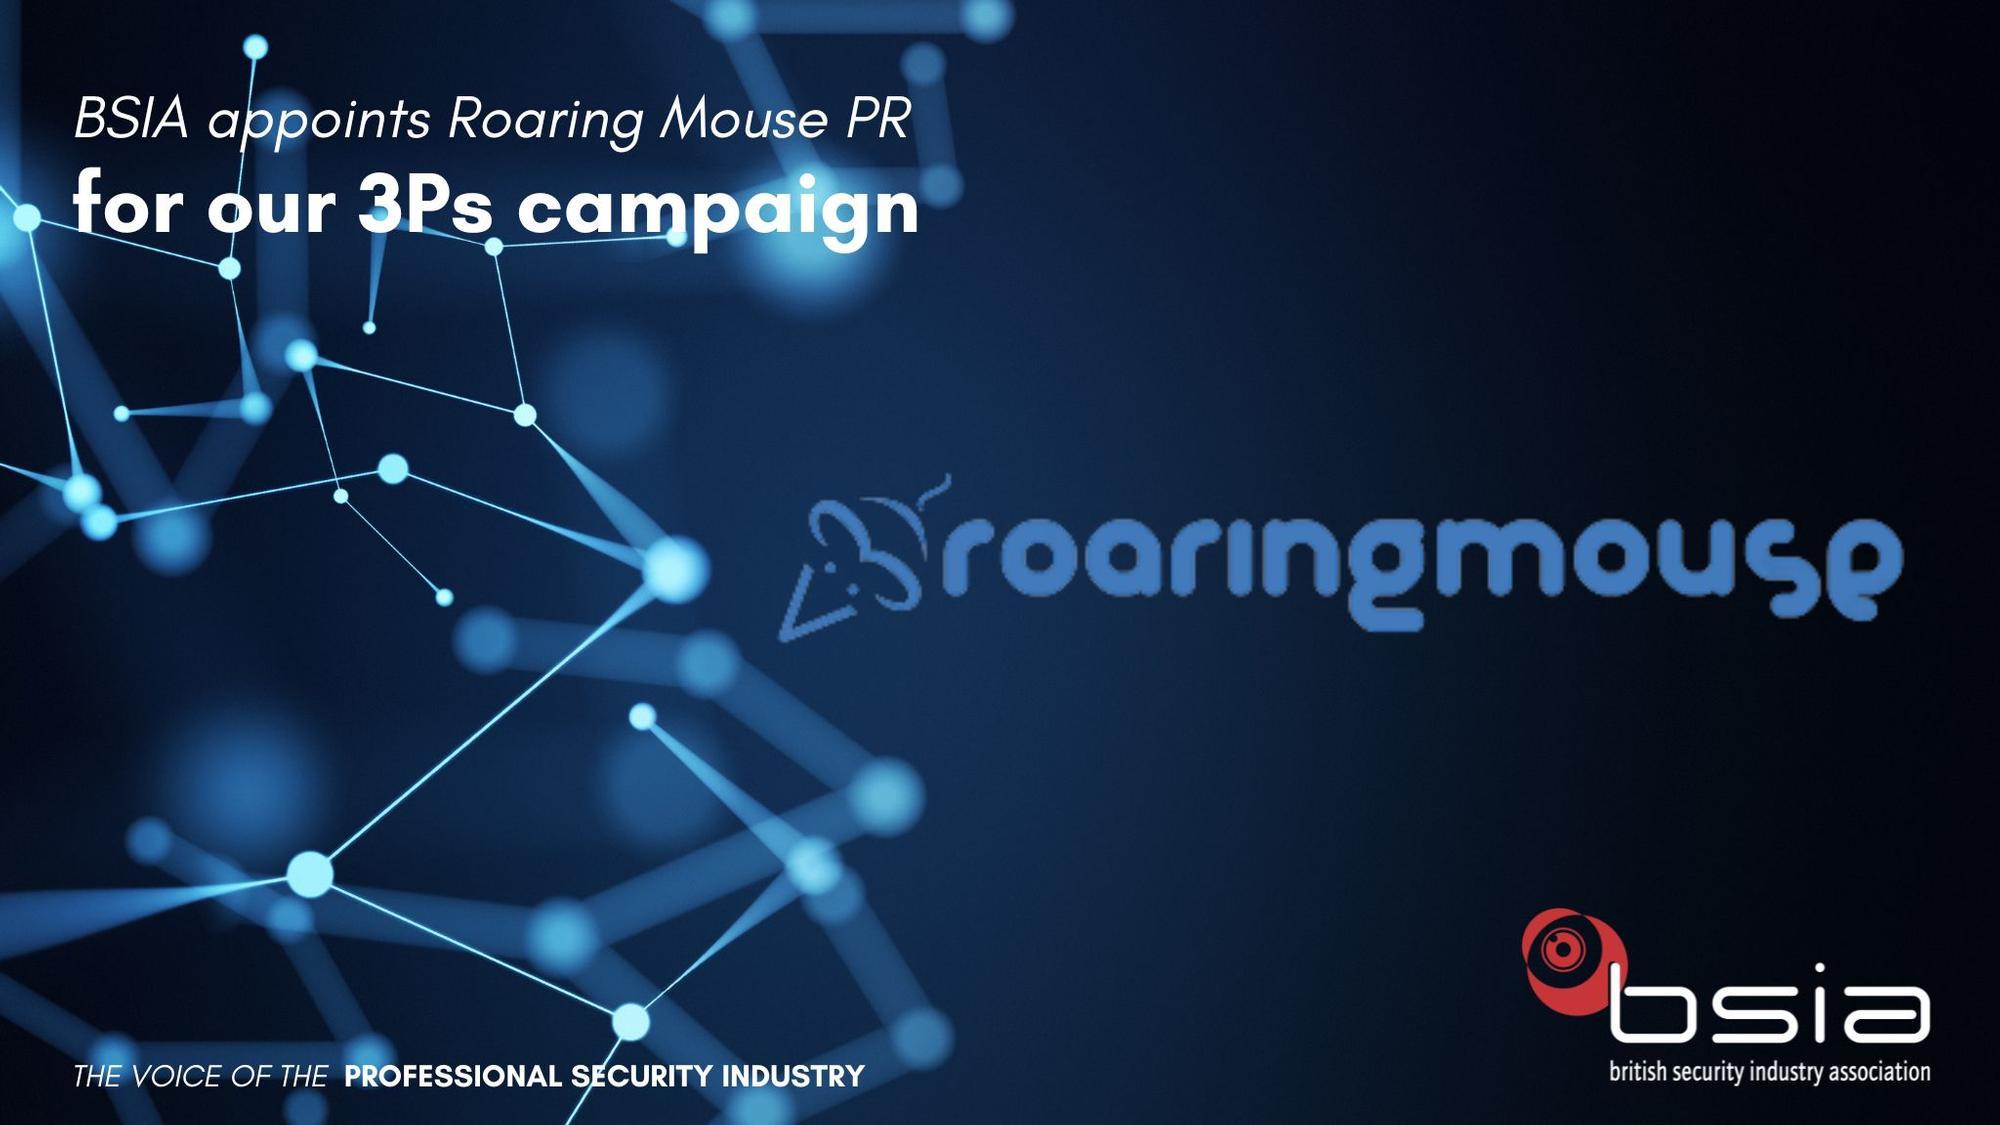 BSIA appoint Roaring Mouse PR to deliver 3Ps campaign